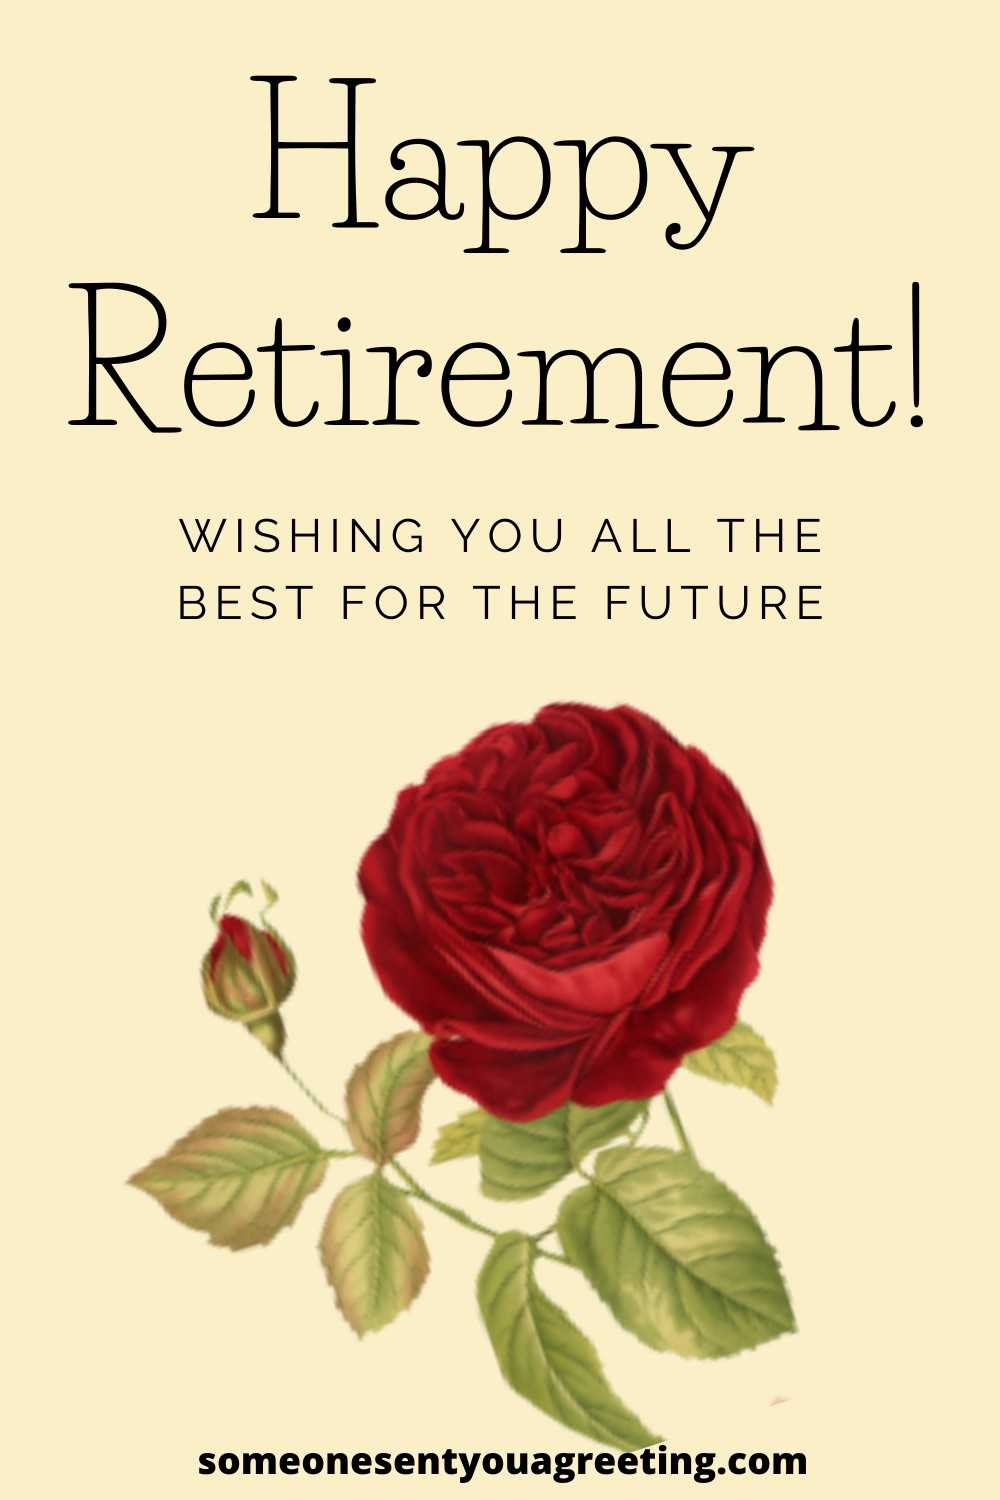 wishing you all the best for the future happy retirement